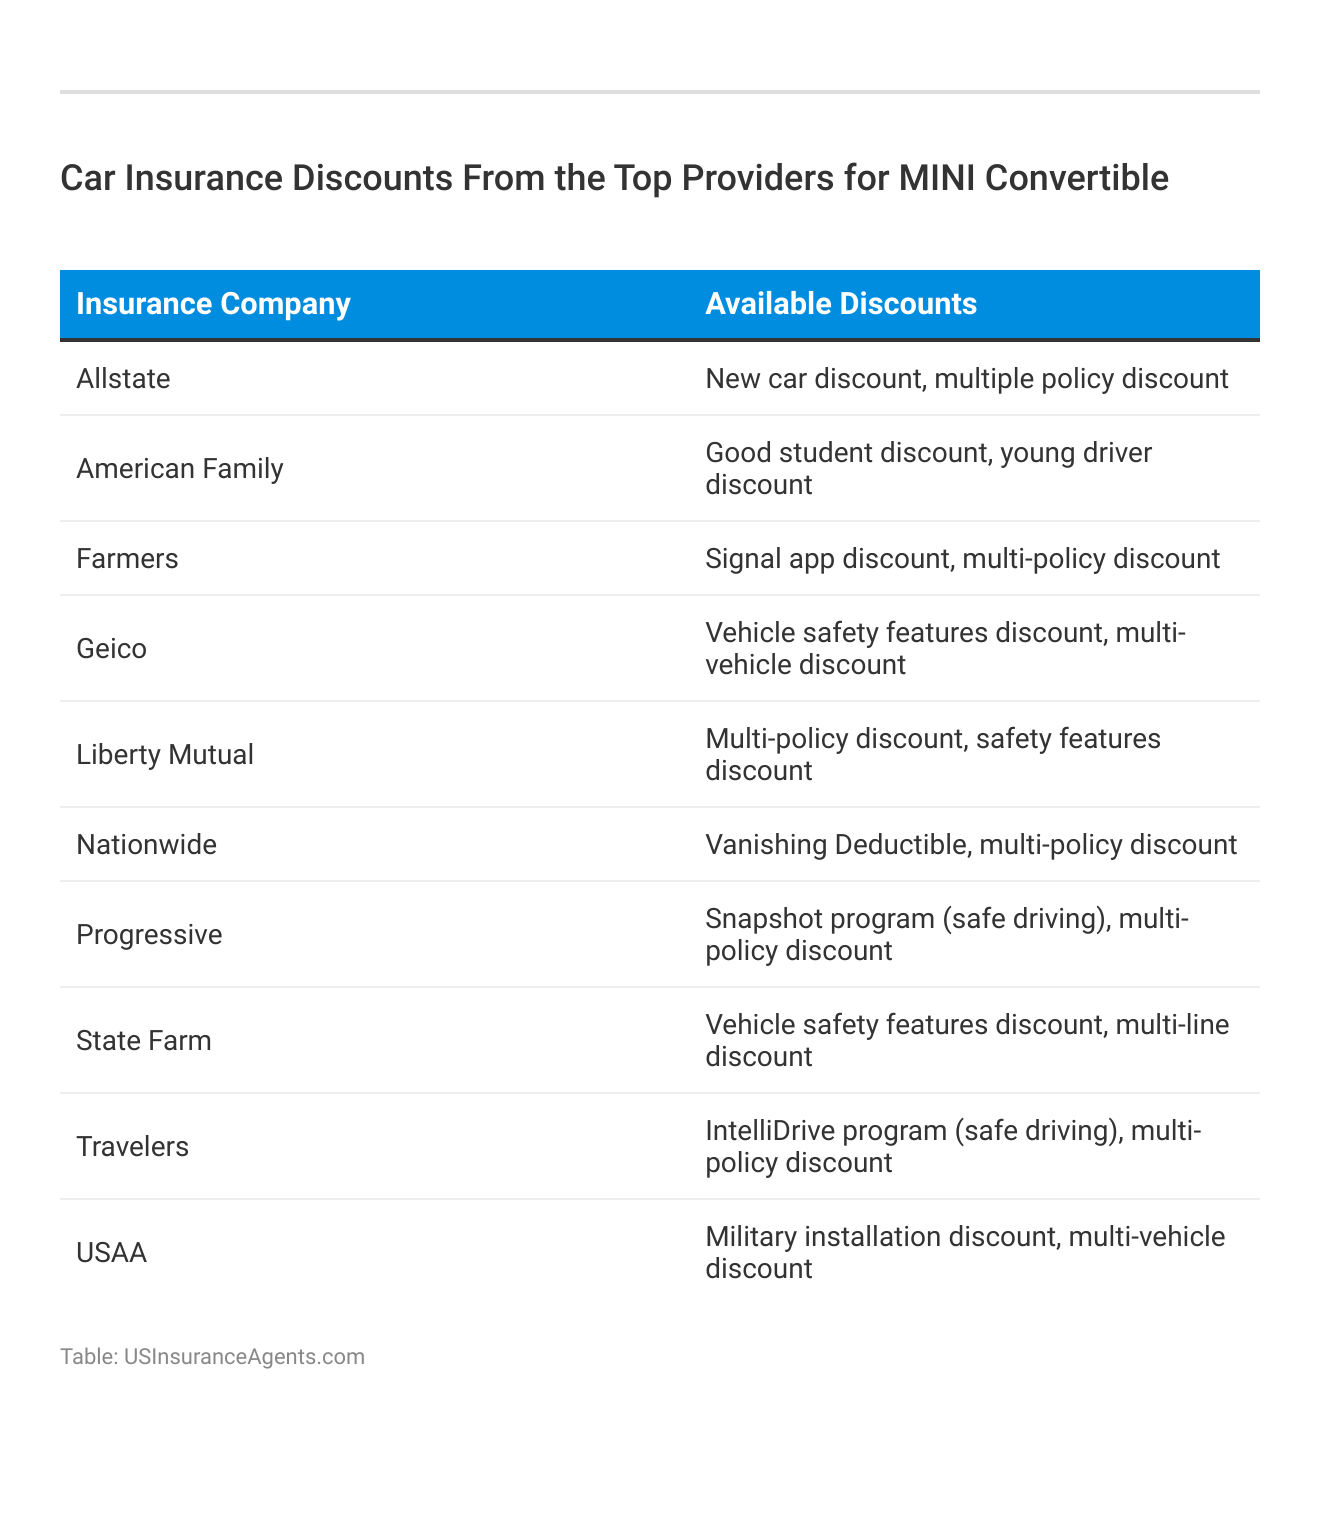 <h3>Car Insurance Discounts From the Top Providers for MINI Convertible</h3> 